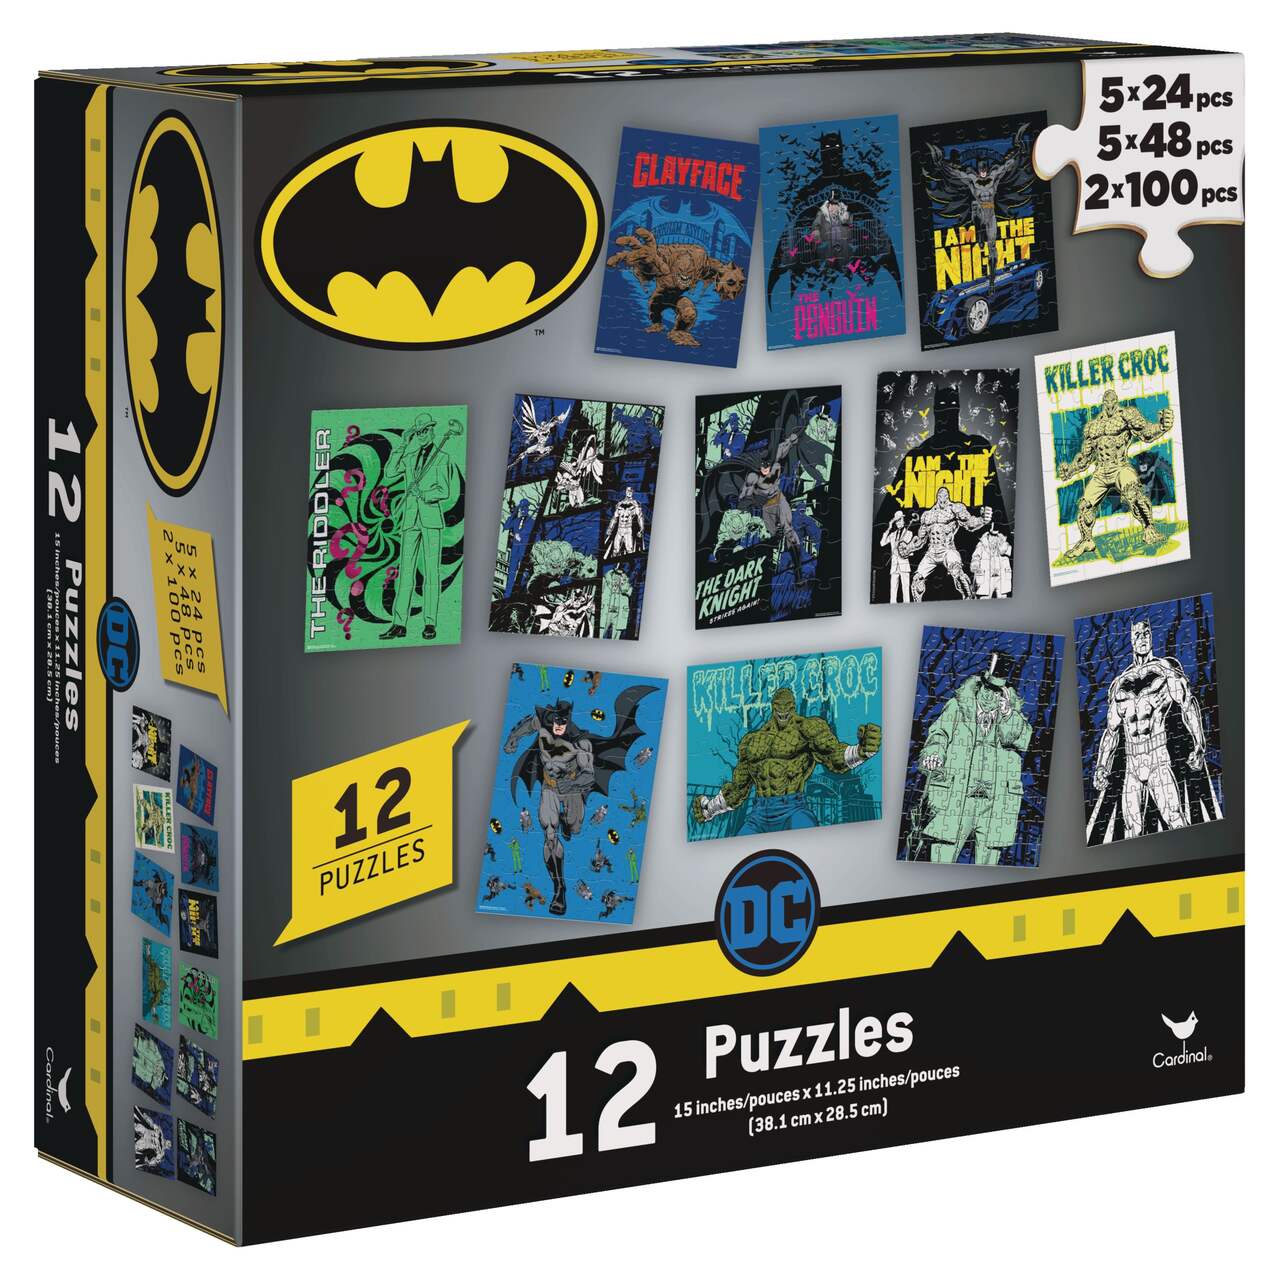 Cardinal 12-Pack Puzzles, Assorted, Age 4+